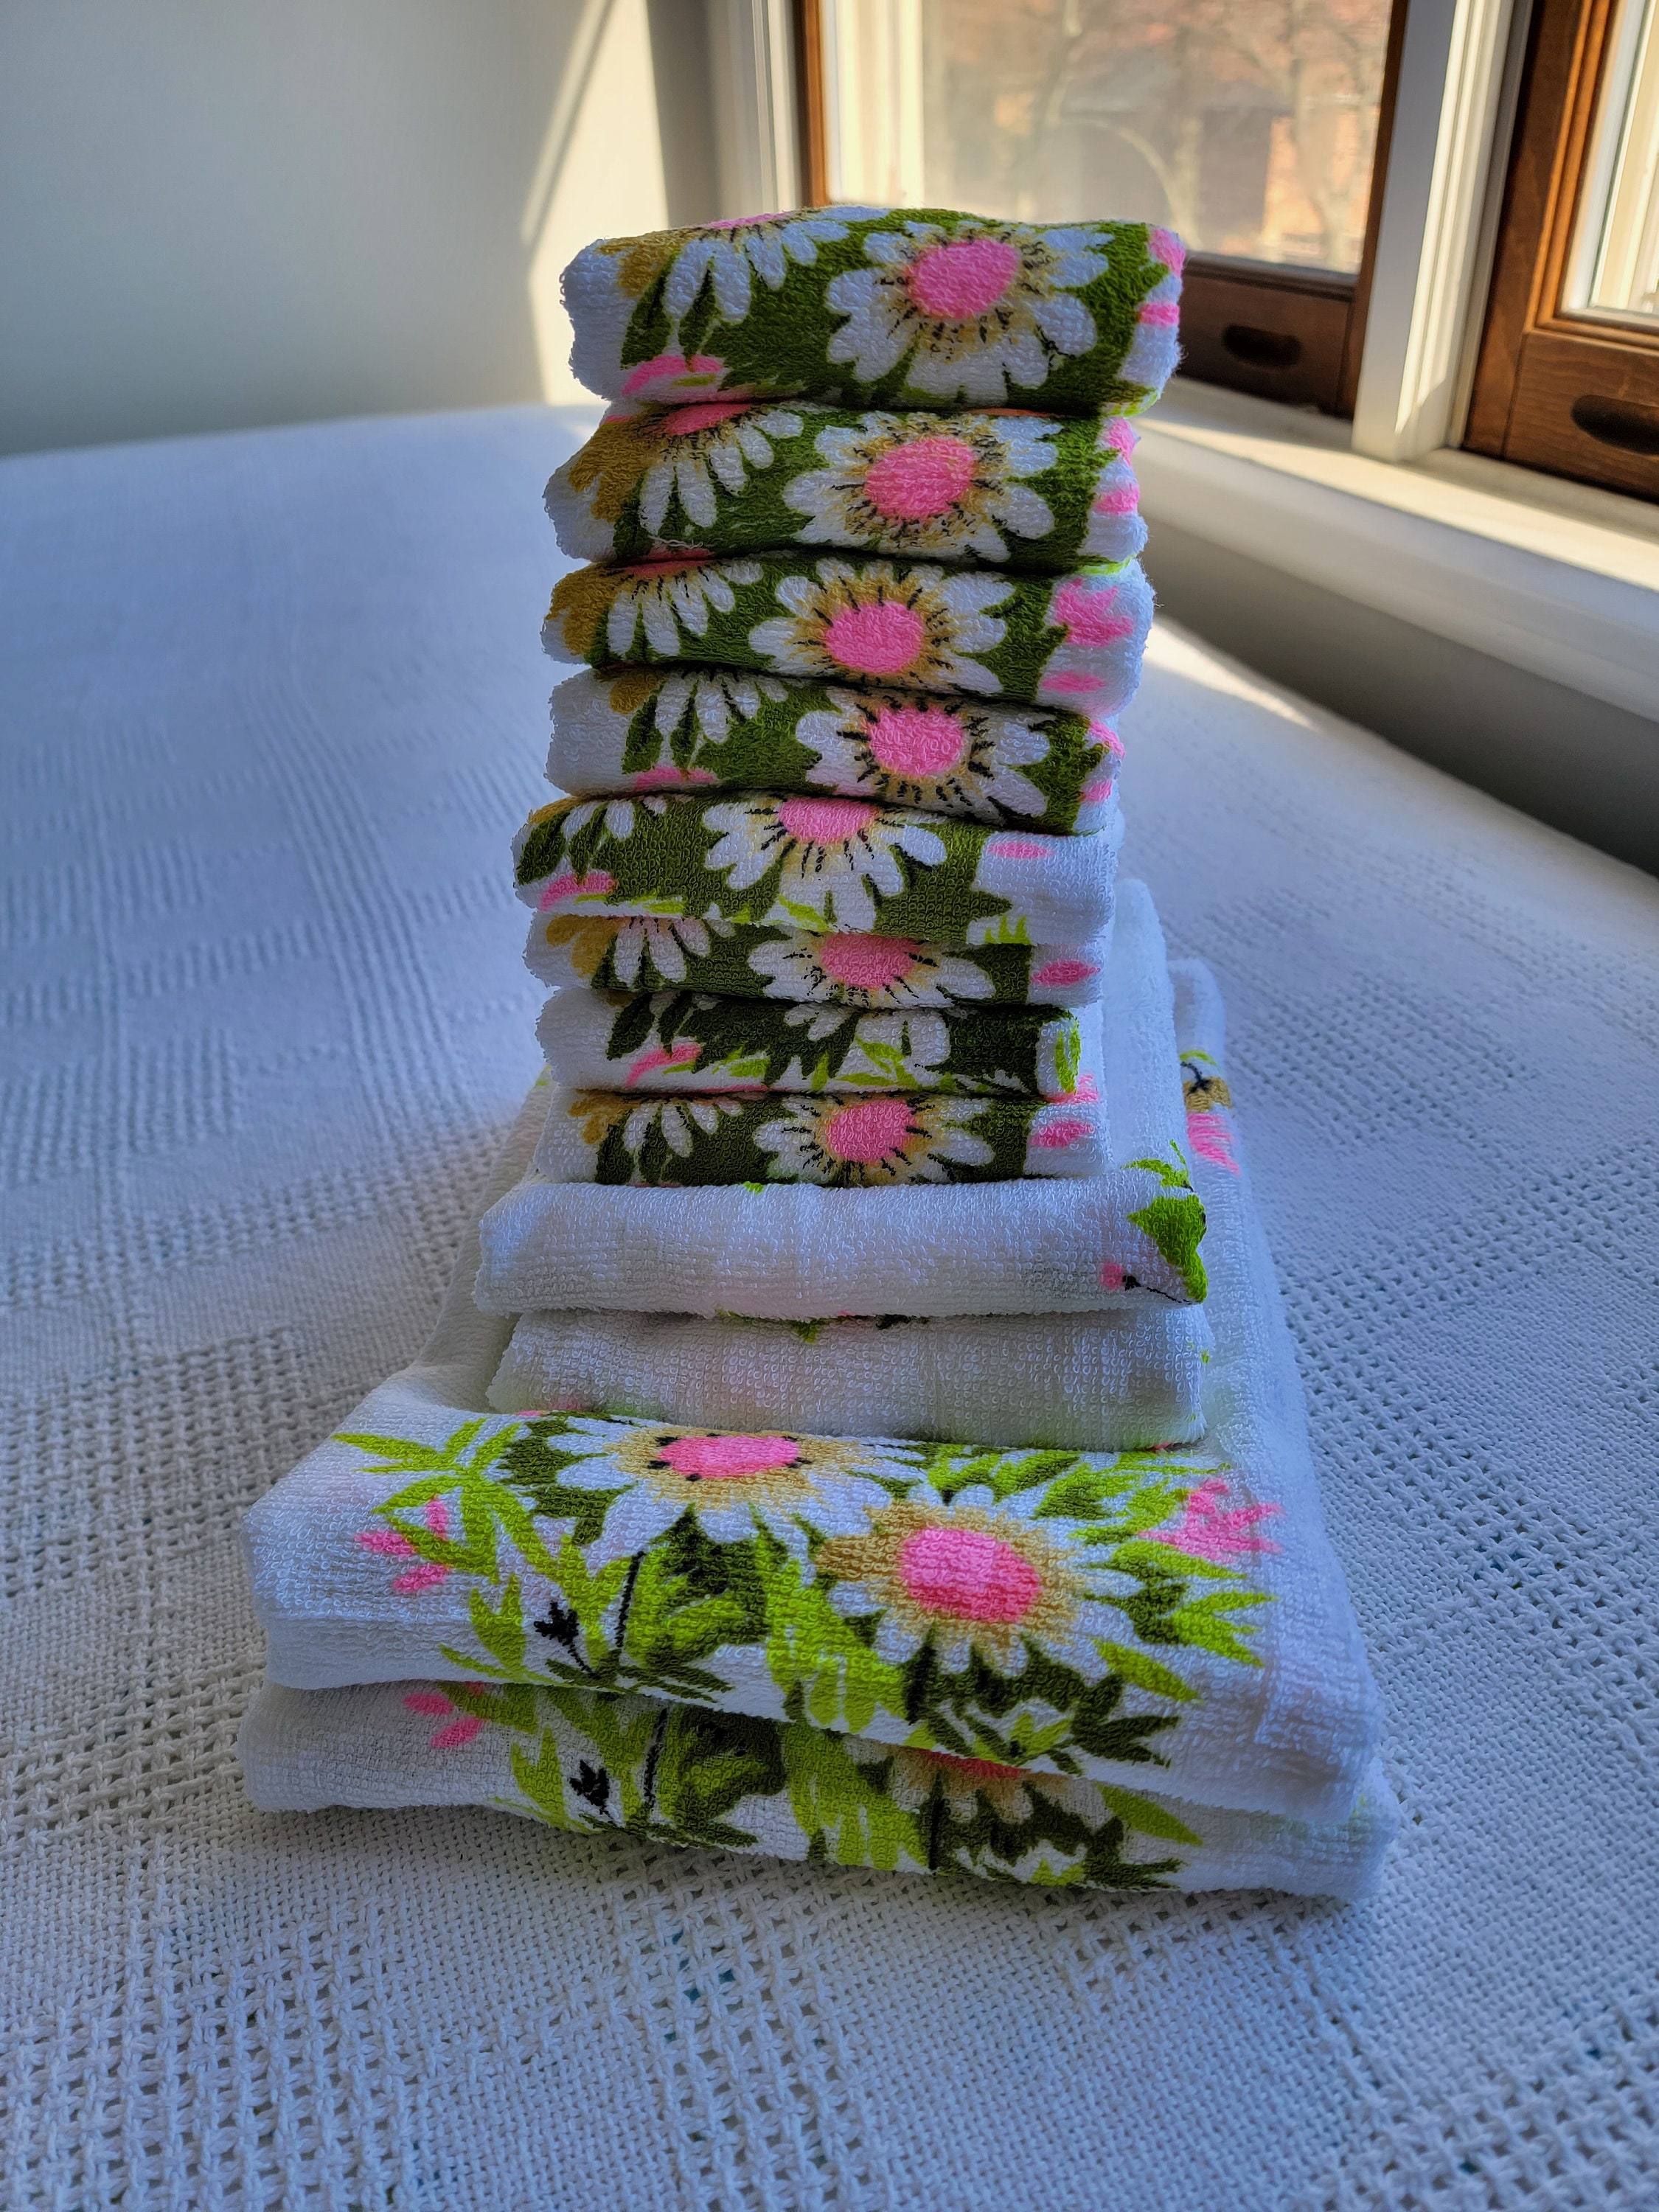 Wamsutta Vintage Bath Towel 24 X 96 Floral Roses Made in the 